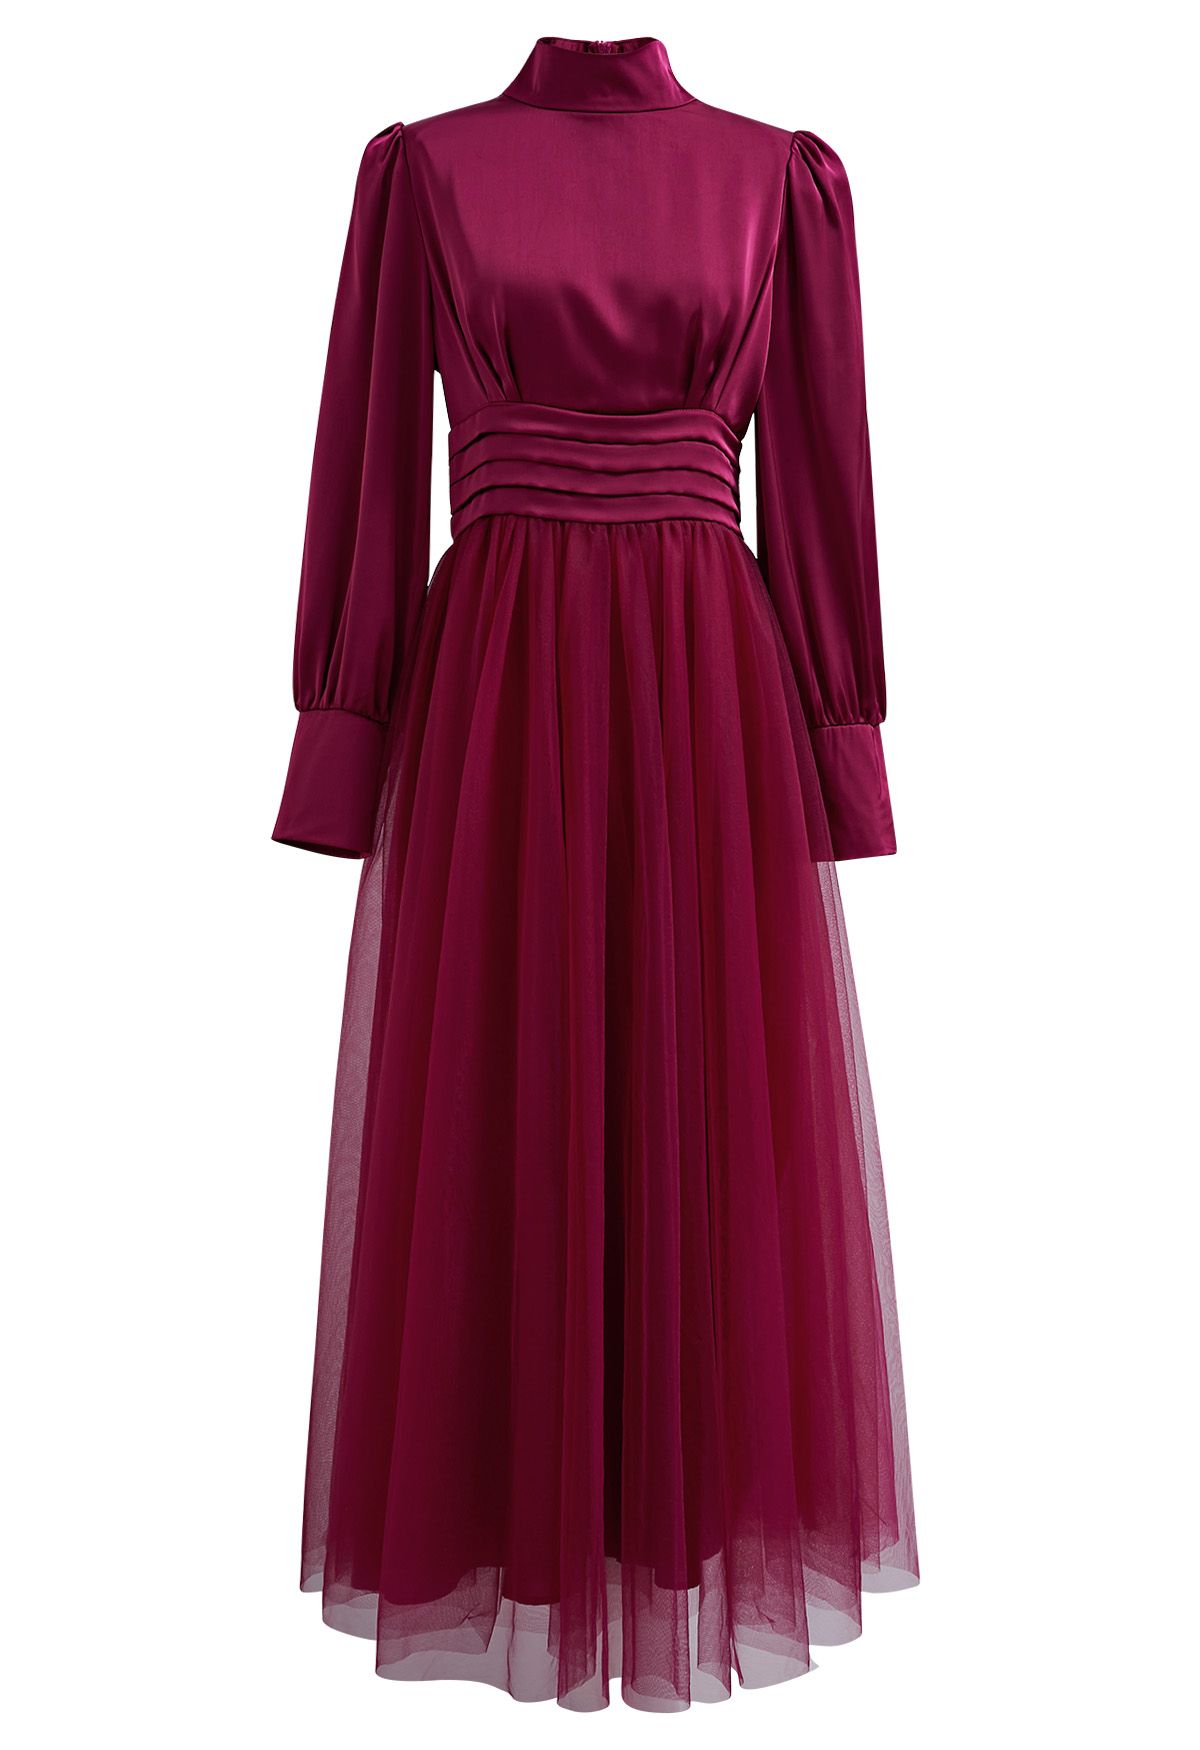 Shine Bright High Neck Tulle Maxi Dress in Burgundy